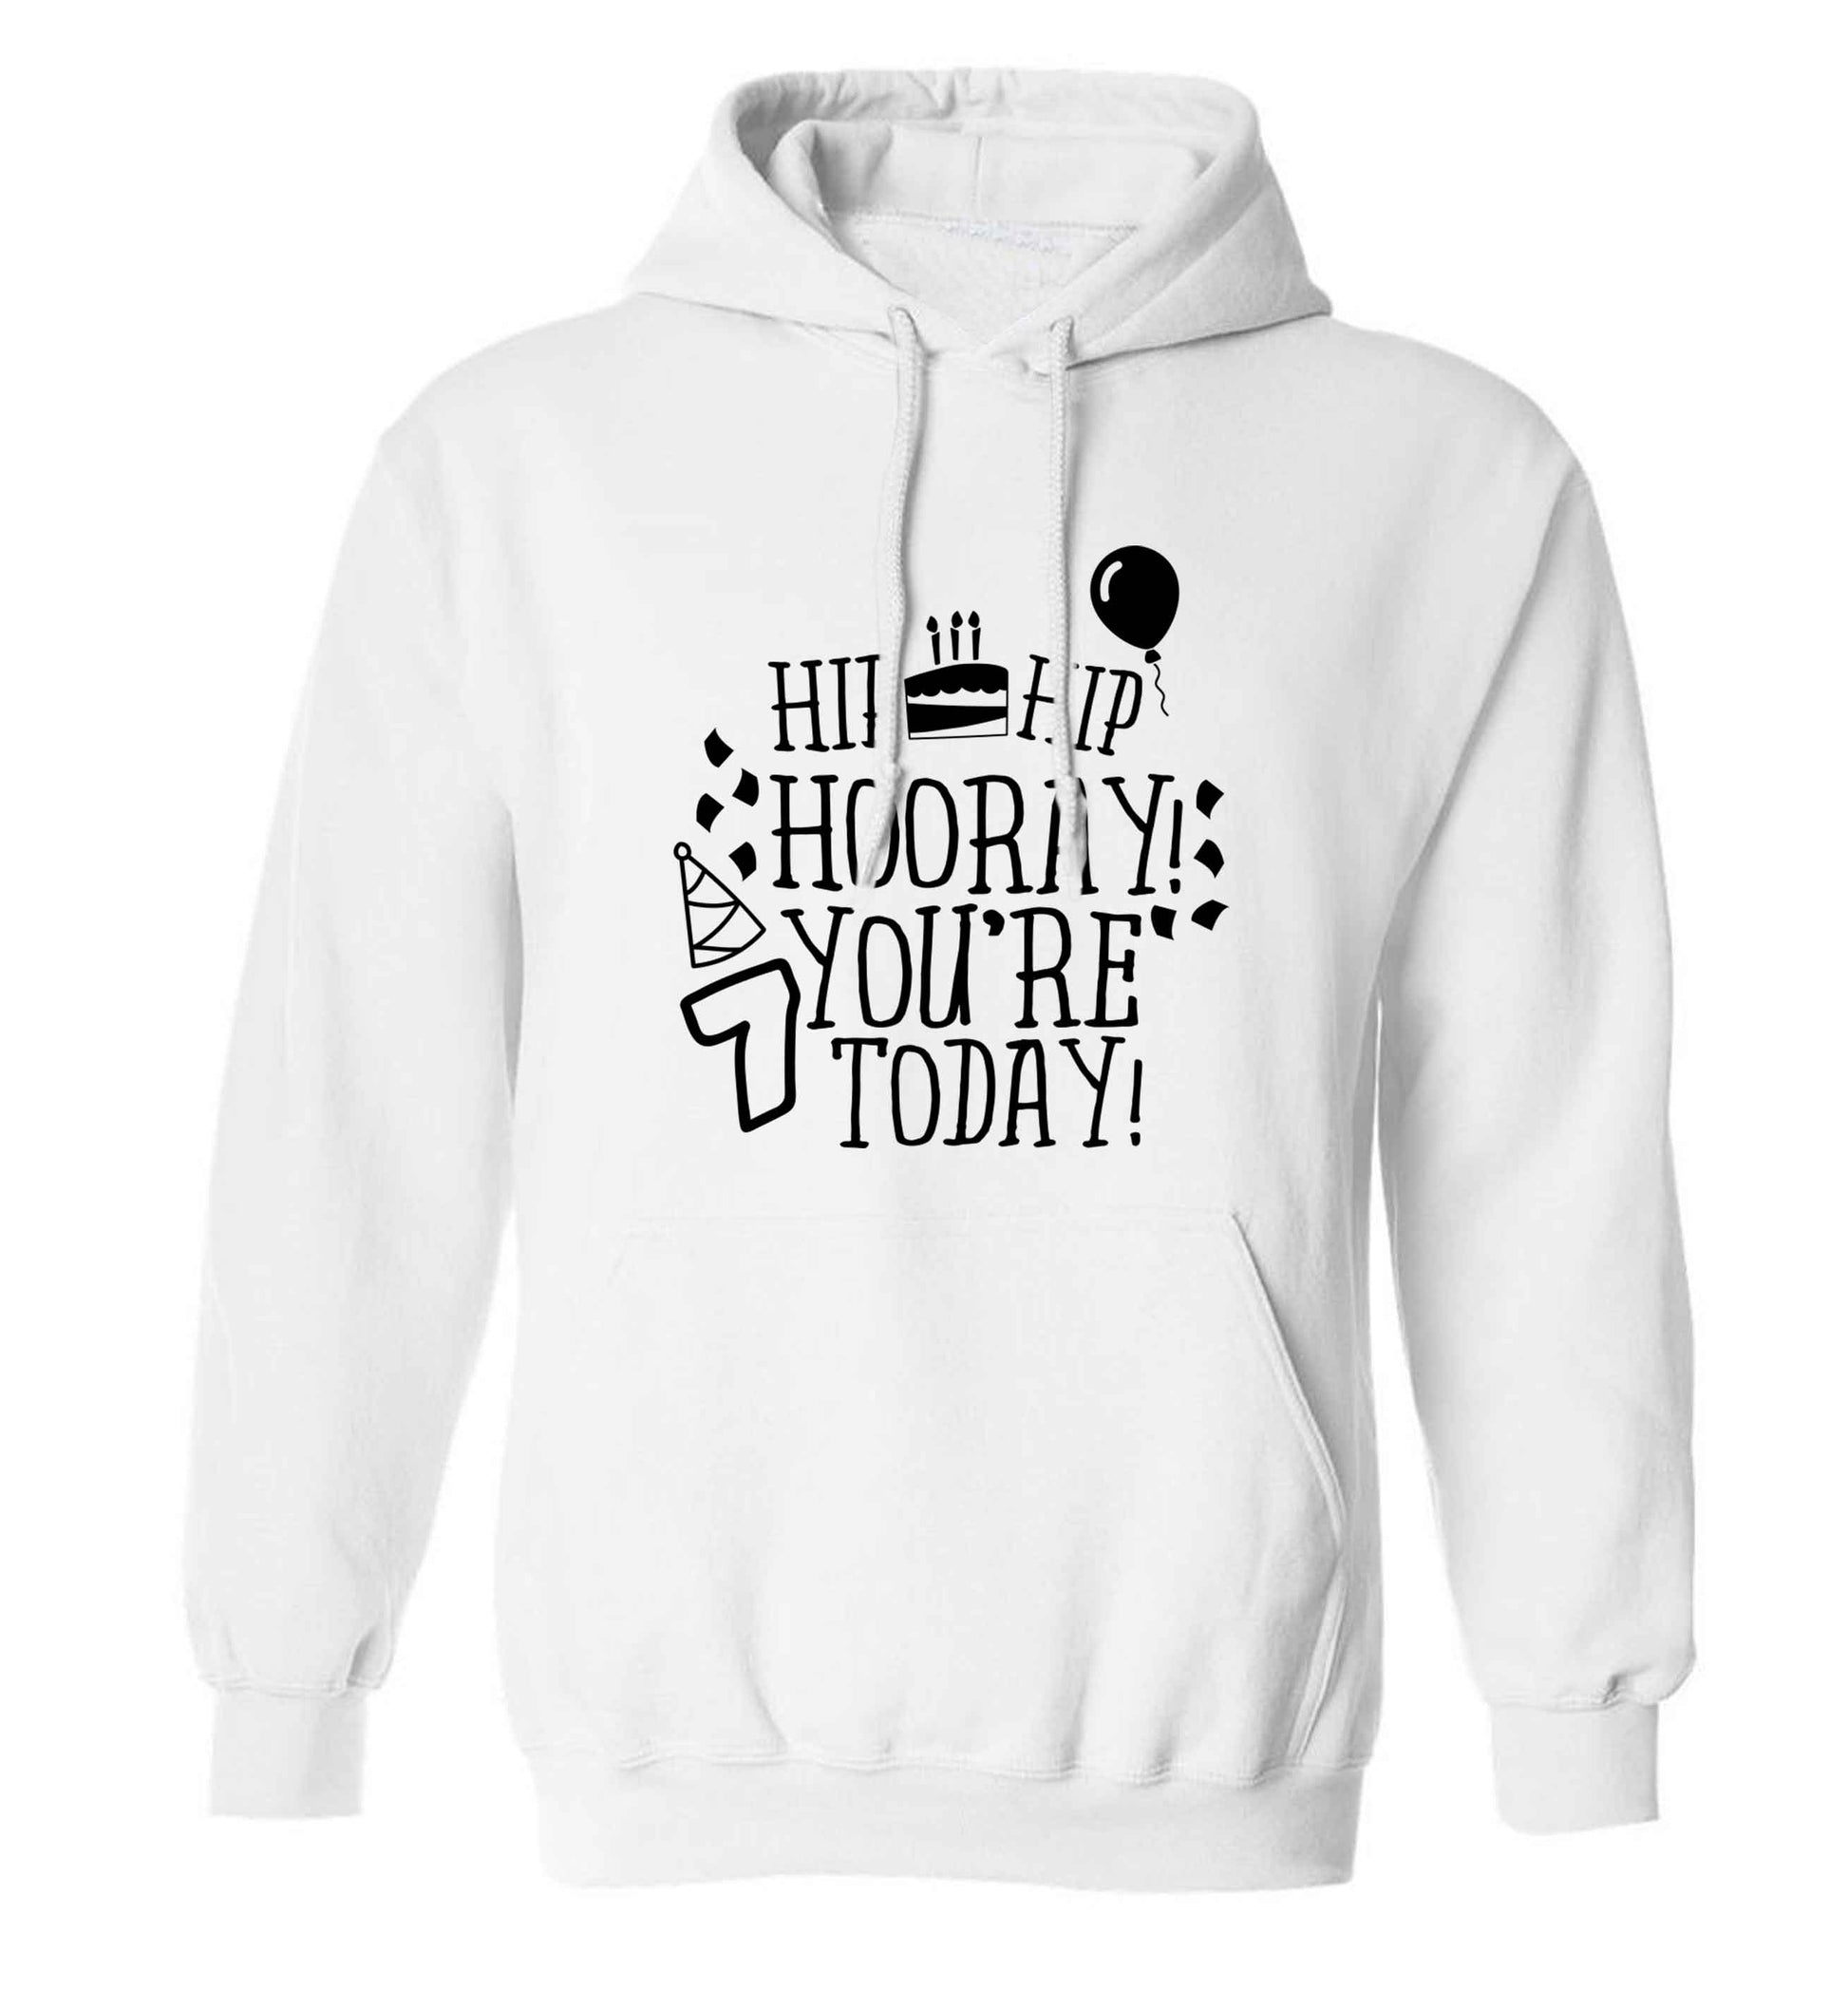 Hip hip hooray you're seven today! adults unisex white hoodie 2XL